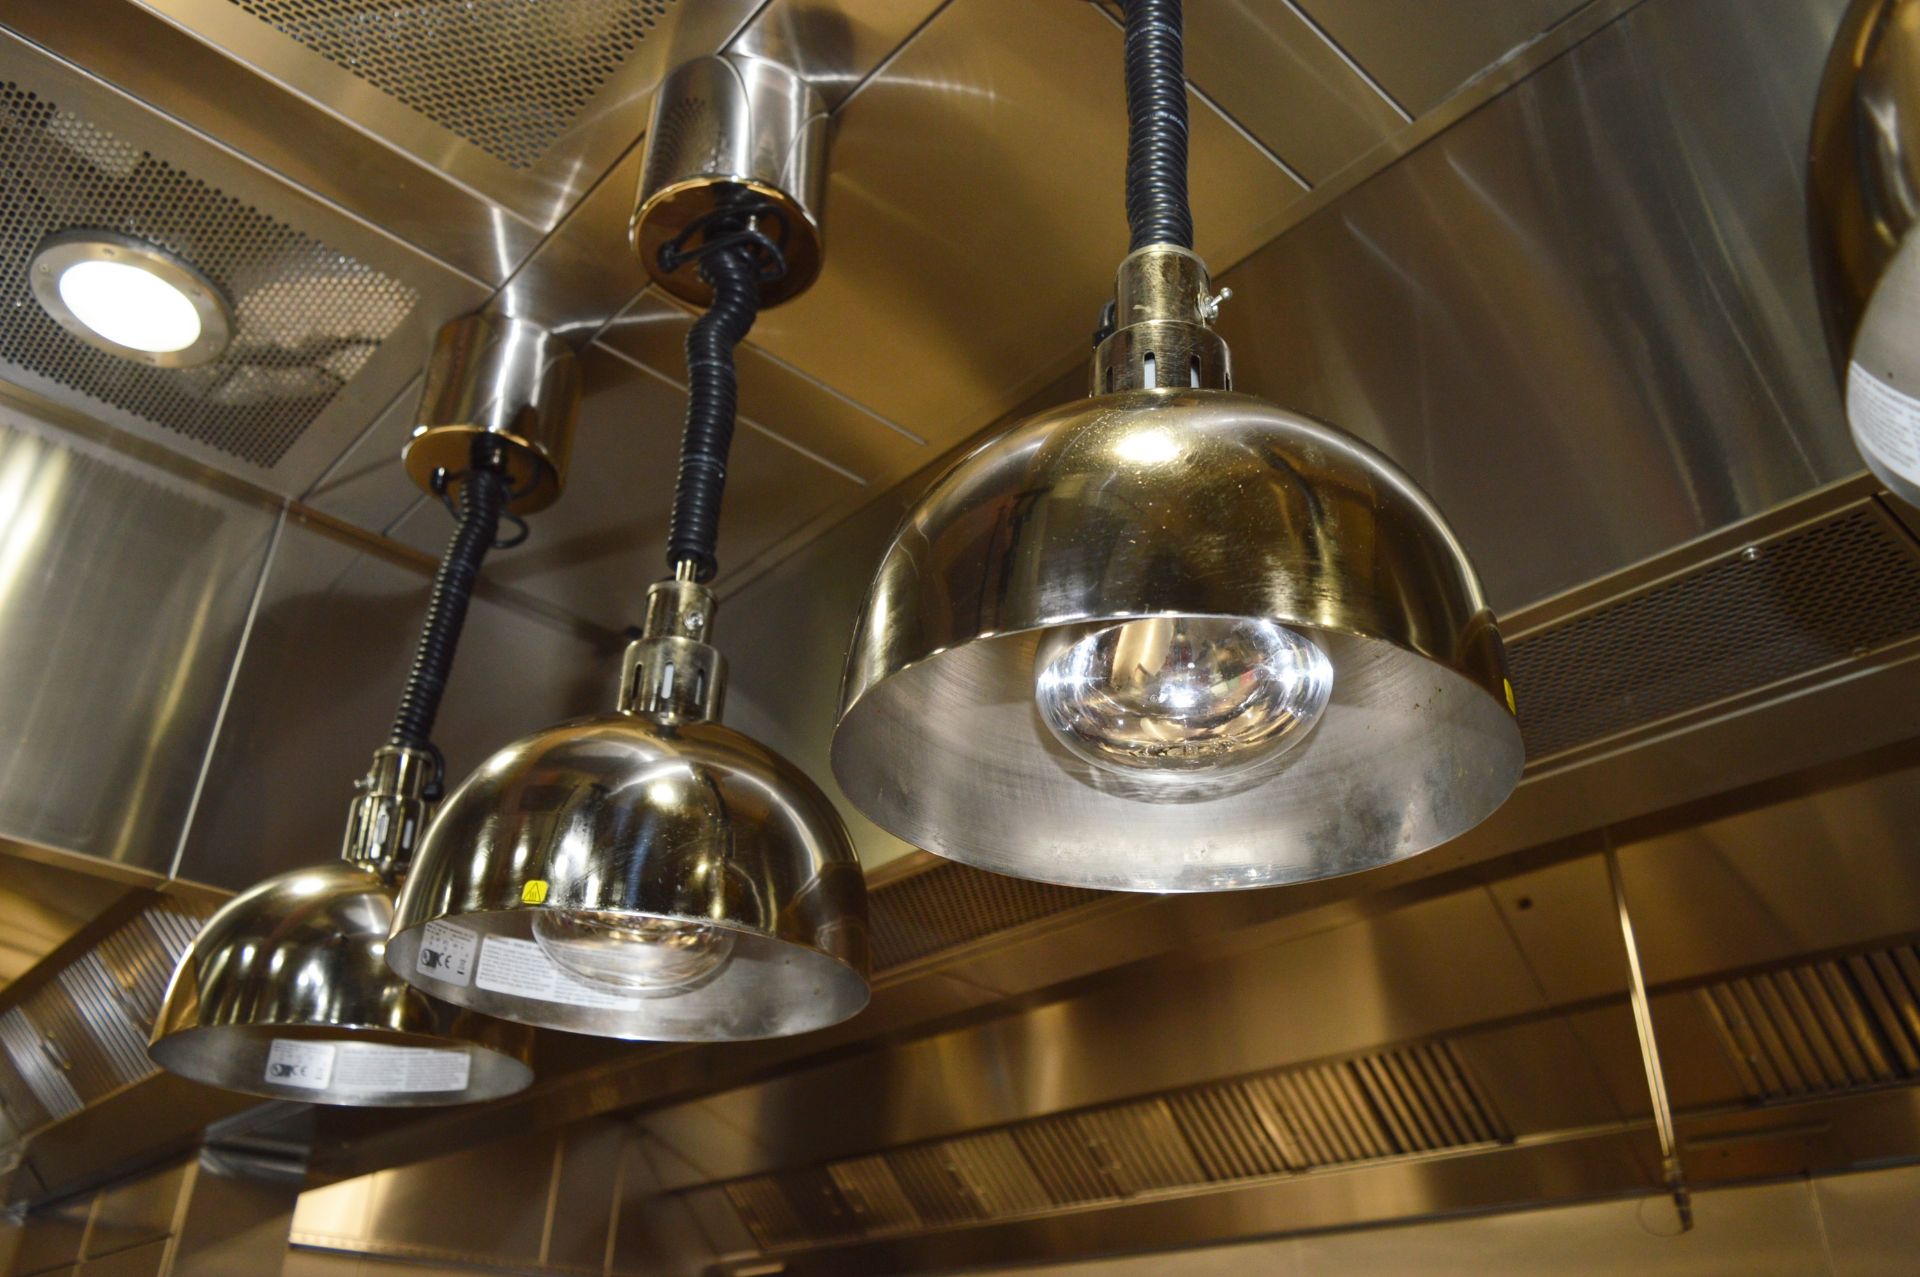 4 x Hatco DL-750-RL Hanging Retractable Heat Lamps in Bright Chrome - Keeps Food Warm at Kitchen - Image 2 of 7